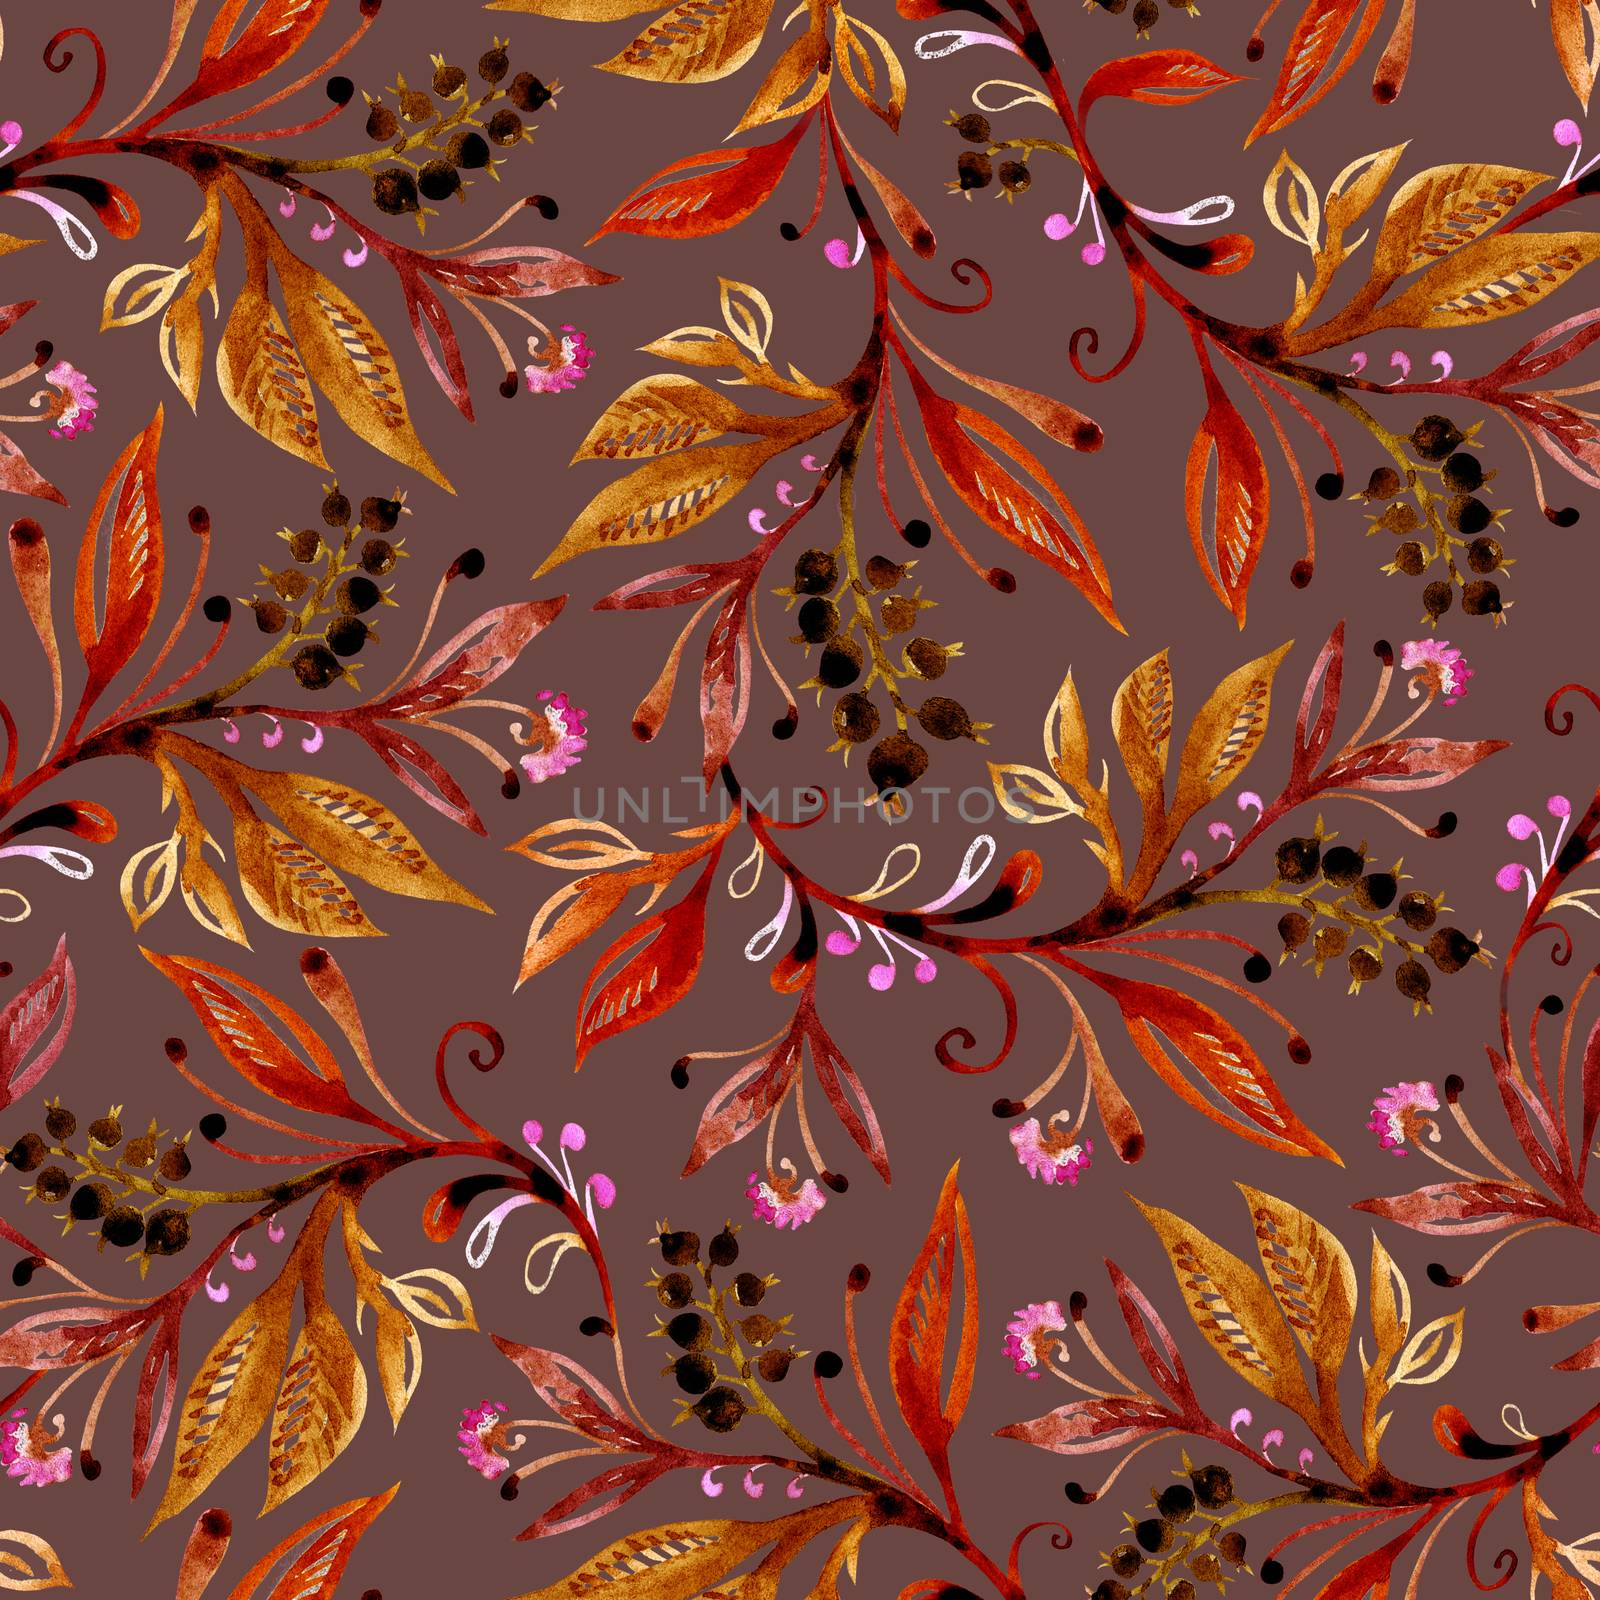 Floral watercolor seamless pattern with leaves and berries in autumn colors on brown background. Background for title, image for blog, decoration. Design for wallpapers, textiles, fabrics, wrappers.